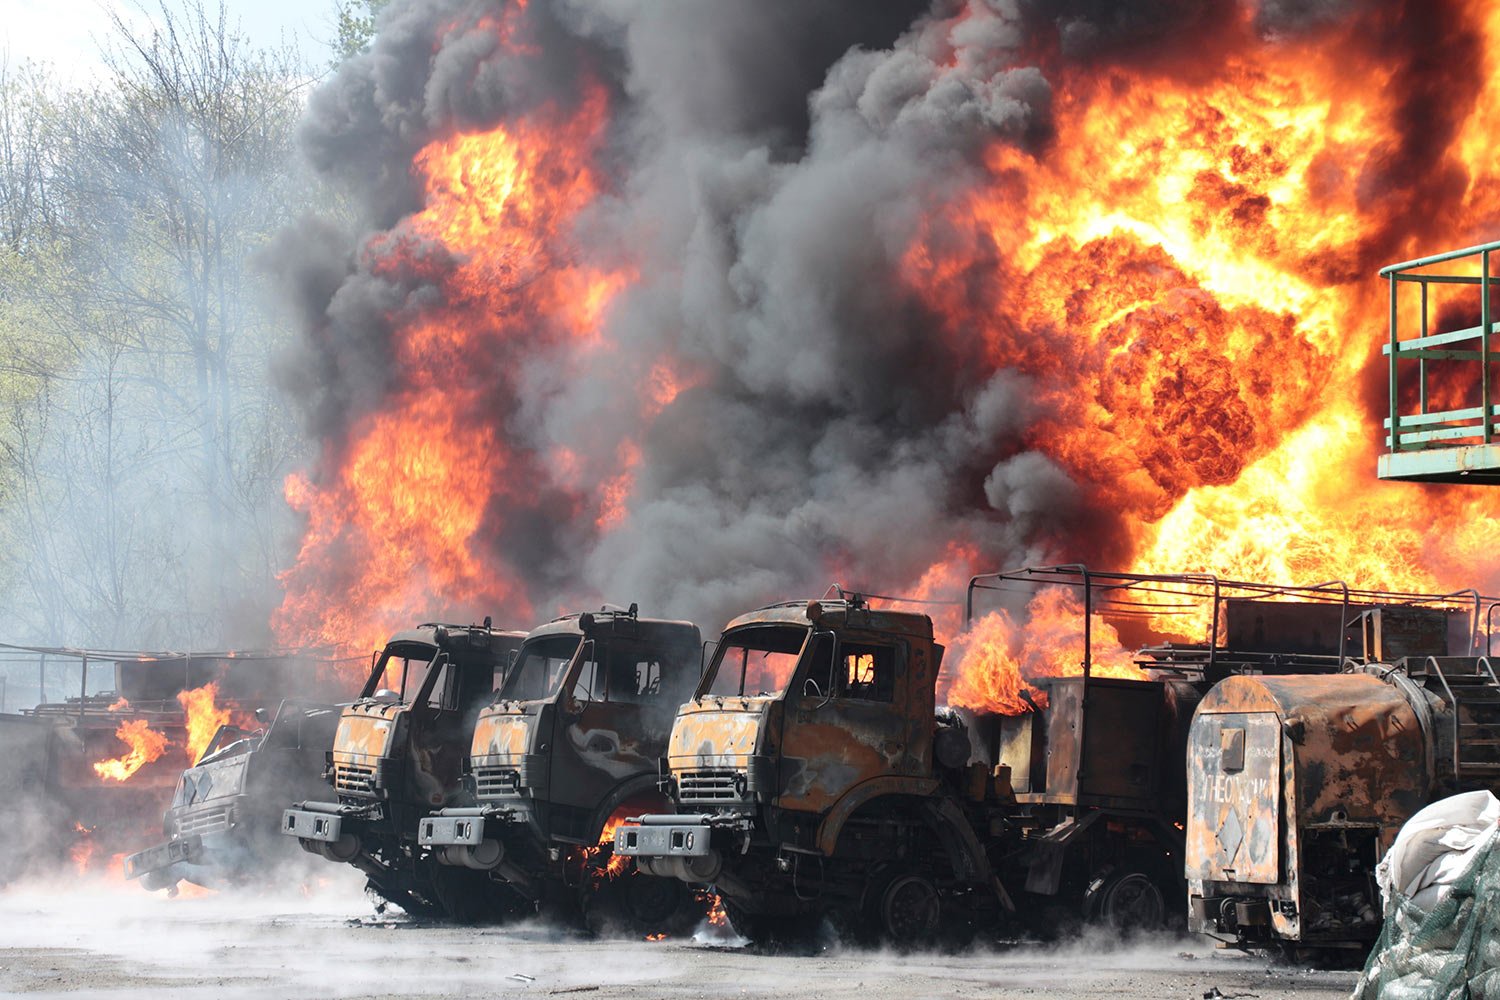  Vehicles are on fire at an oil depot after missiles struck the facility in an area controlled by Russian-backed separatist forces in Makiivka, east of Donetsk, eastern Ukraine, Wednesday, May 4, 2022. (AP Photo) 